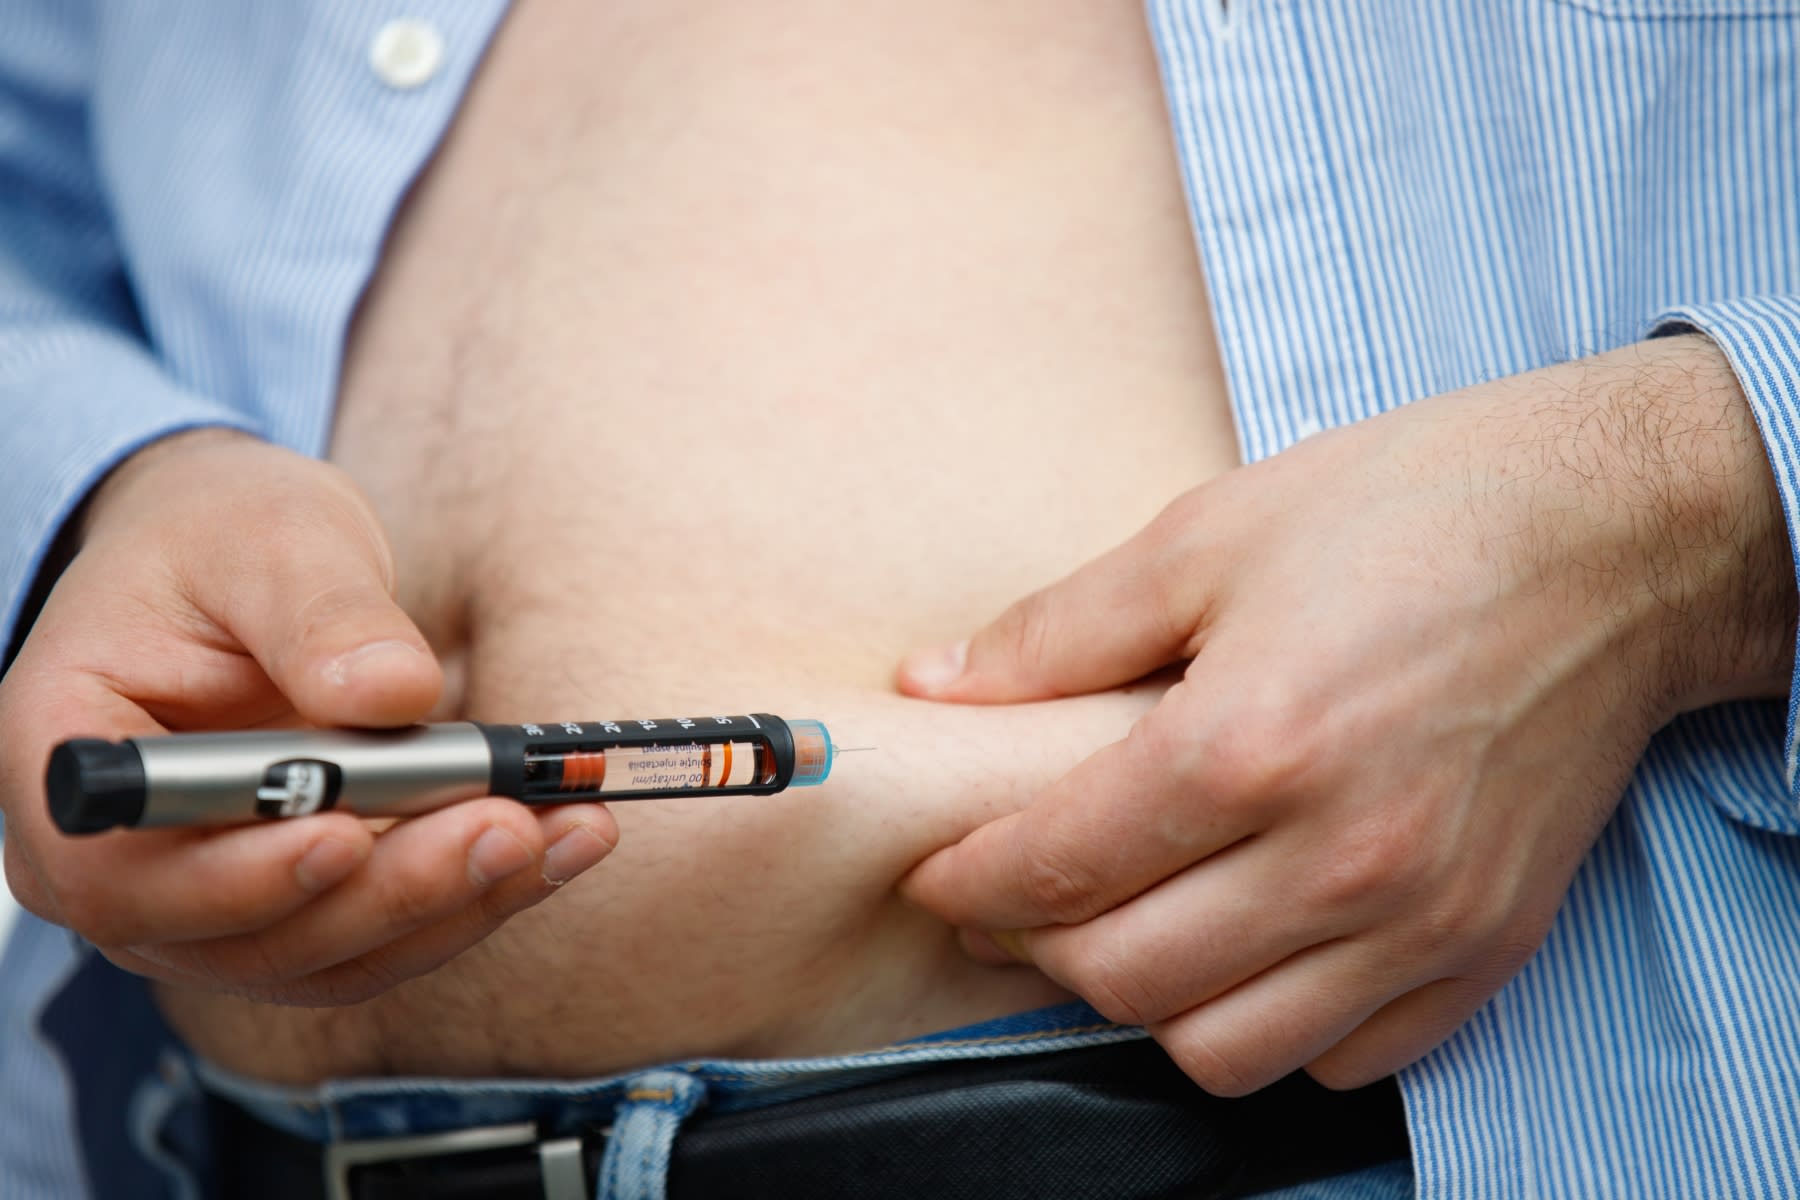 Administering rapid-acting insulin into the abdomen in a picture. With one hand, a fold of skin is lifted from the stomach, into which the pen is pressed perpendicularly before the insulin is dispensed by pressing the end of the pen.